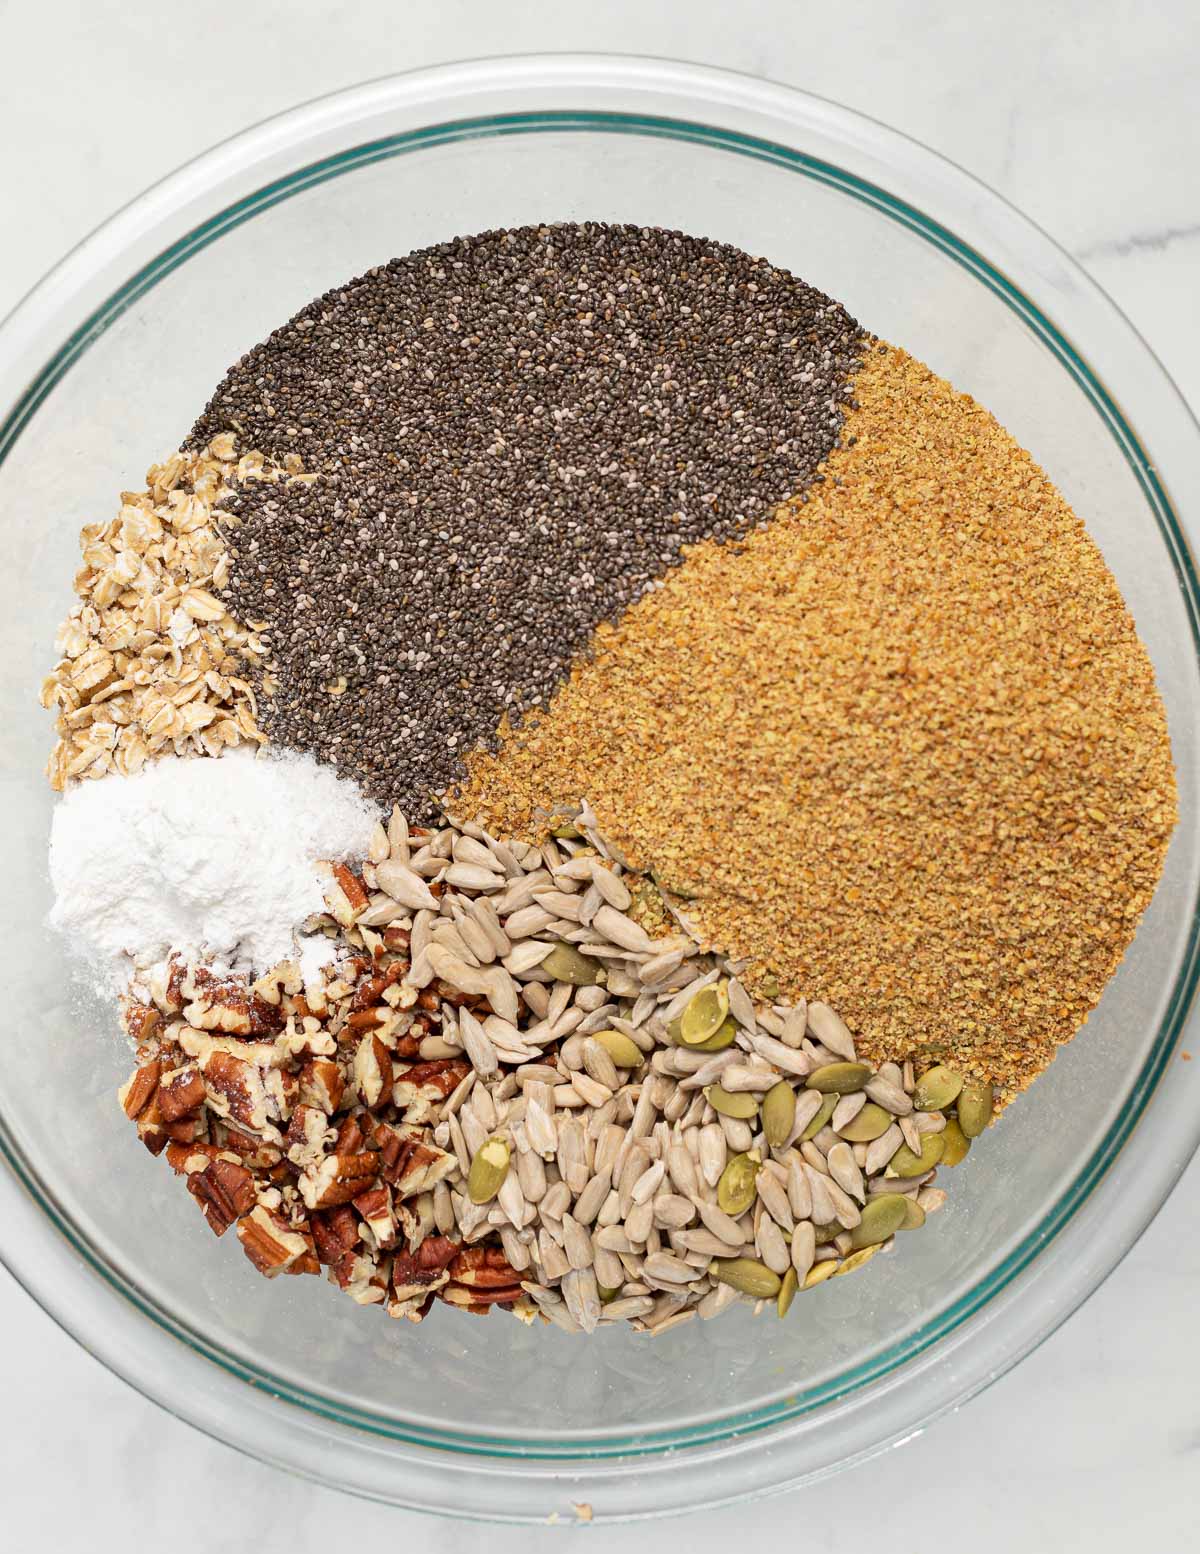 dry ingredients for gluten-free seed bread in a bowl